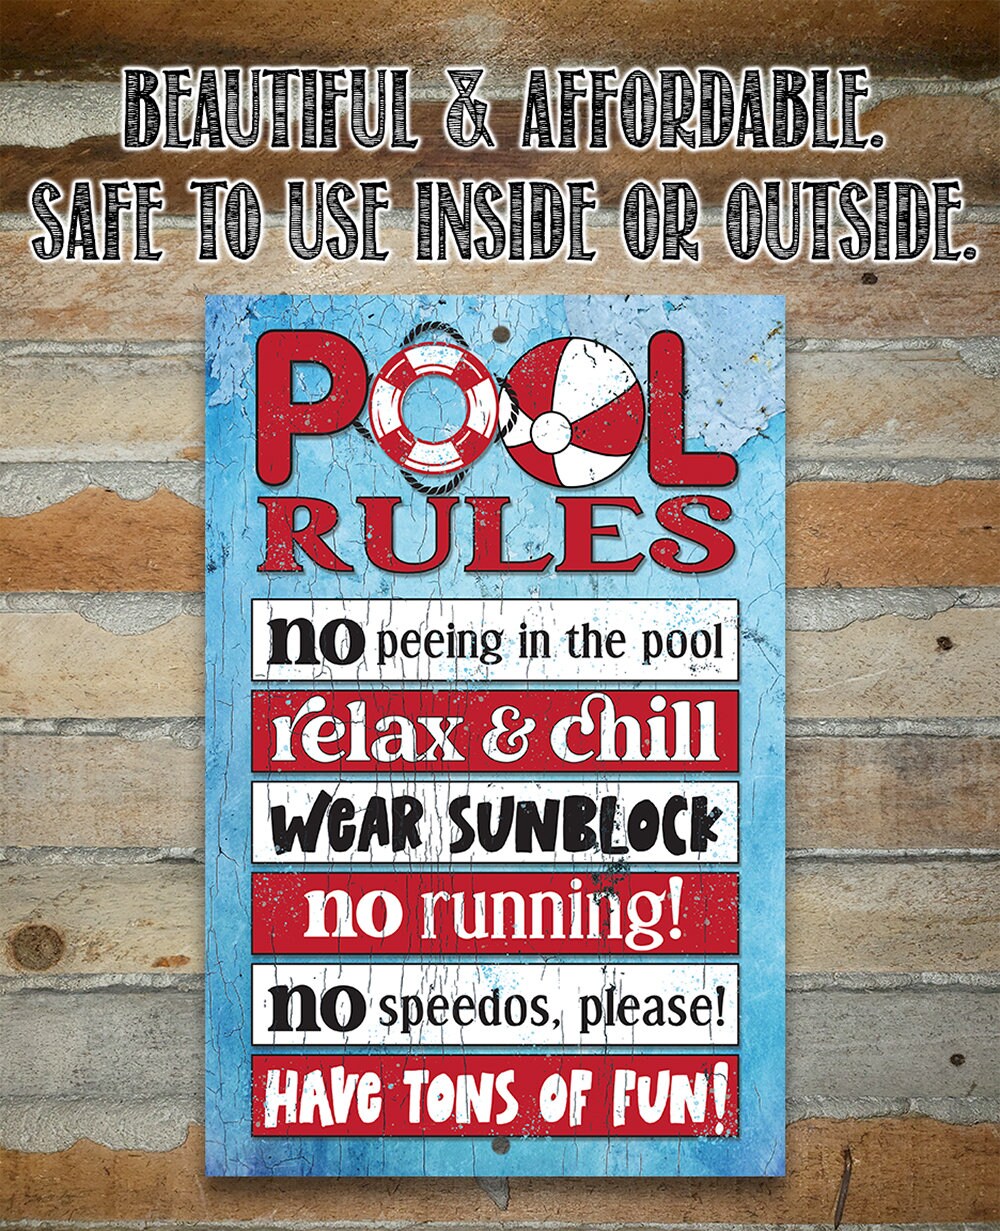 Swimming Pool Themed Sign - Metal Pool Rules Signs for Outside Funny Pool Decor - Wall Art Swimming Pool Decorations Outdoor - Pool Signs